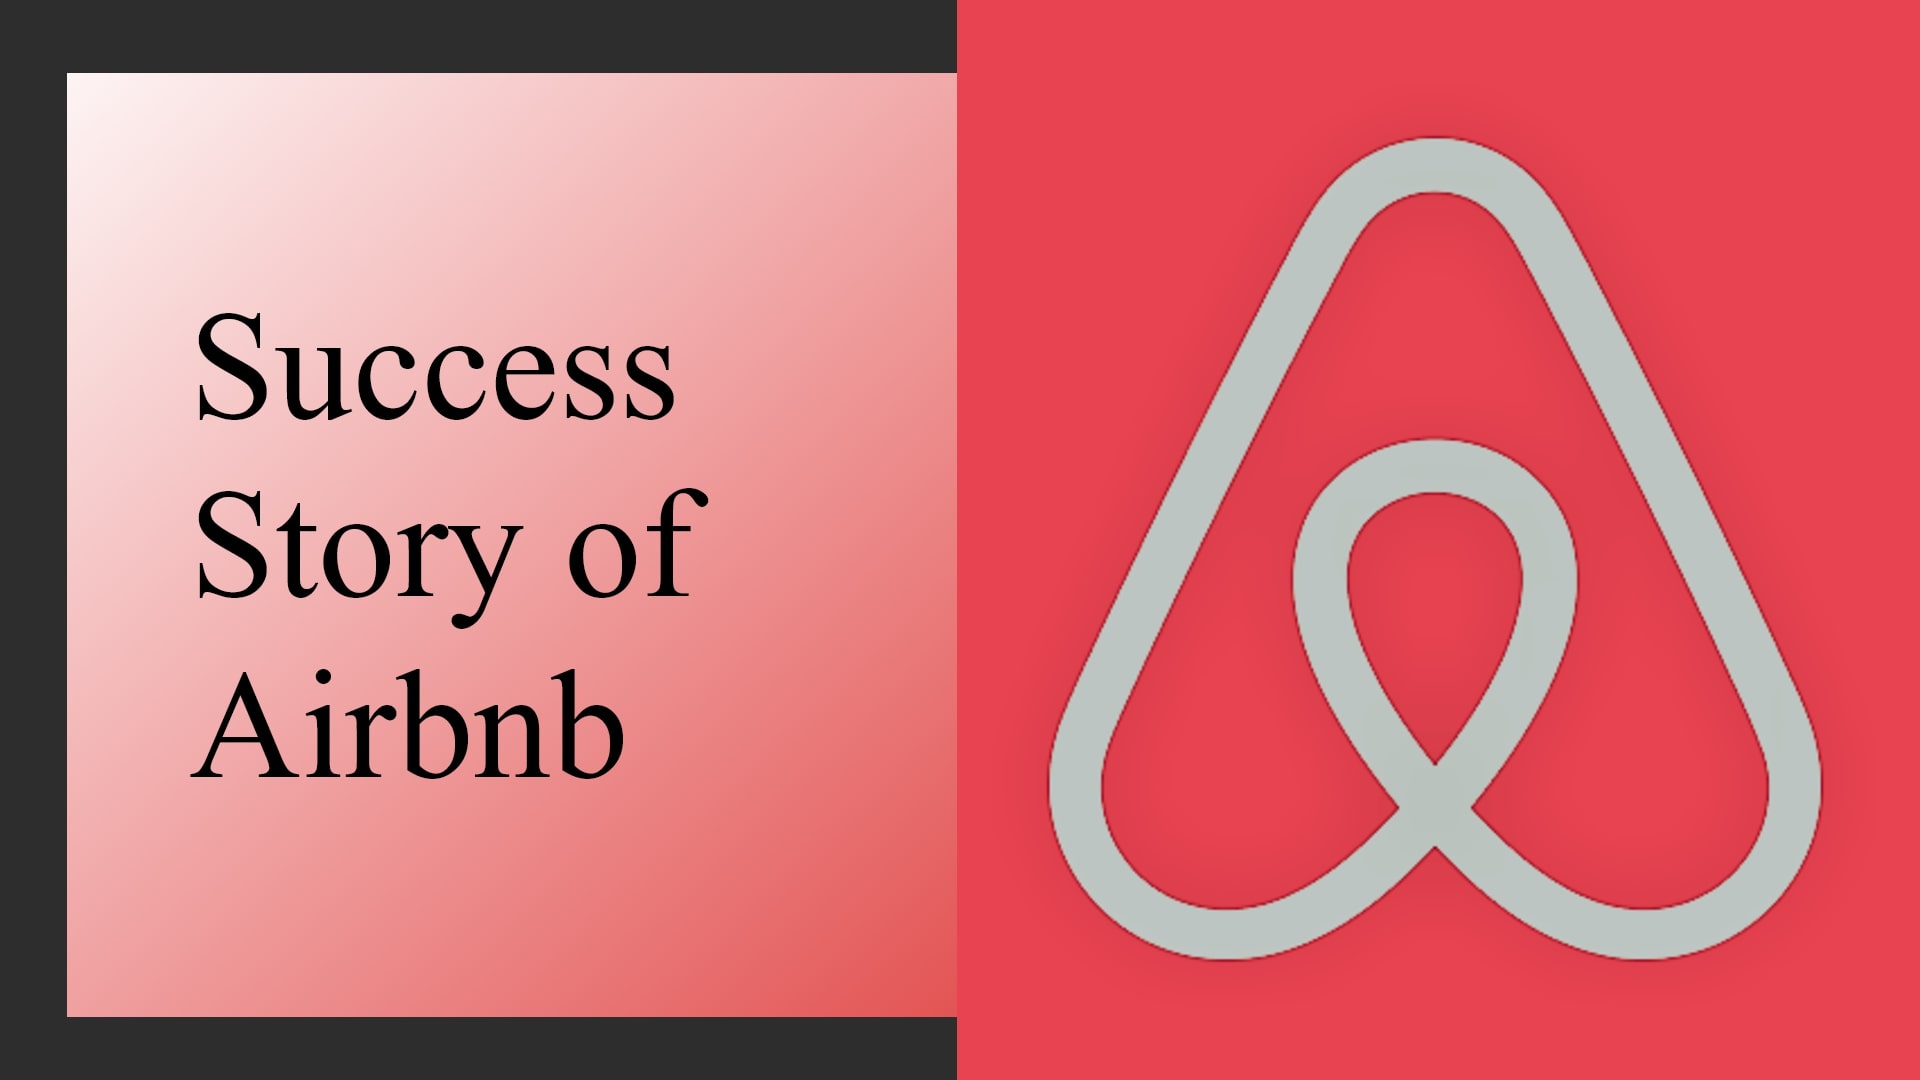 Airbnb Success Story